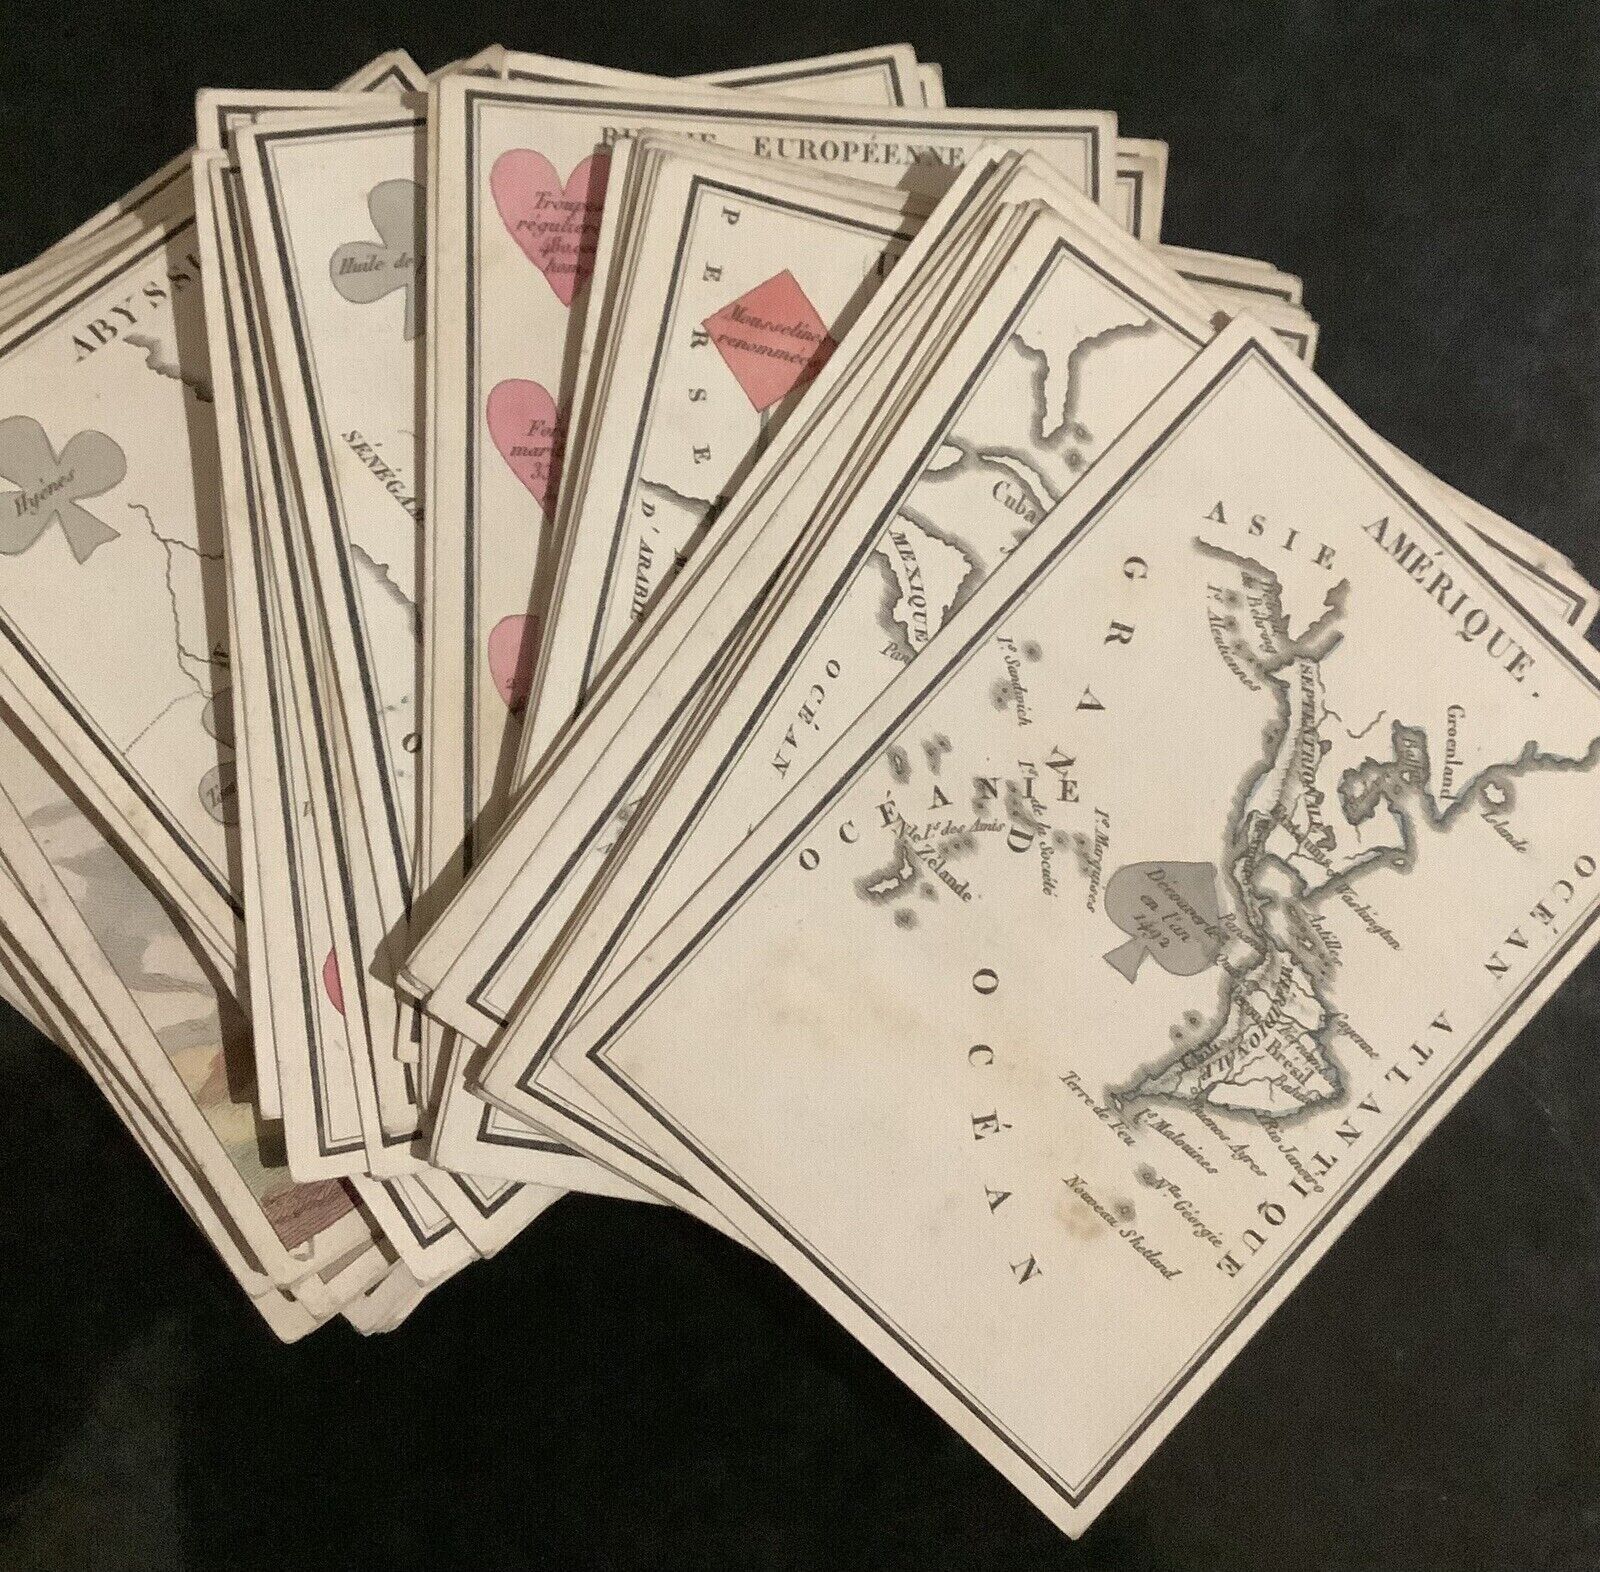 c 1825 Geographical Playing cards - attributed to René Janet